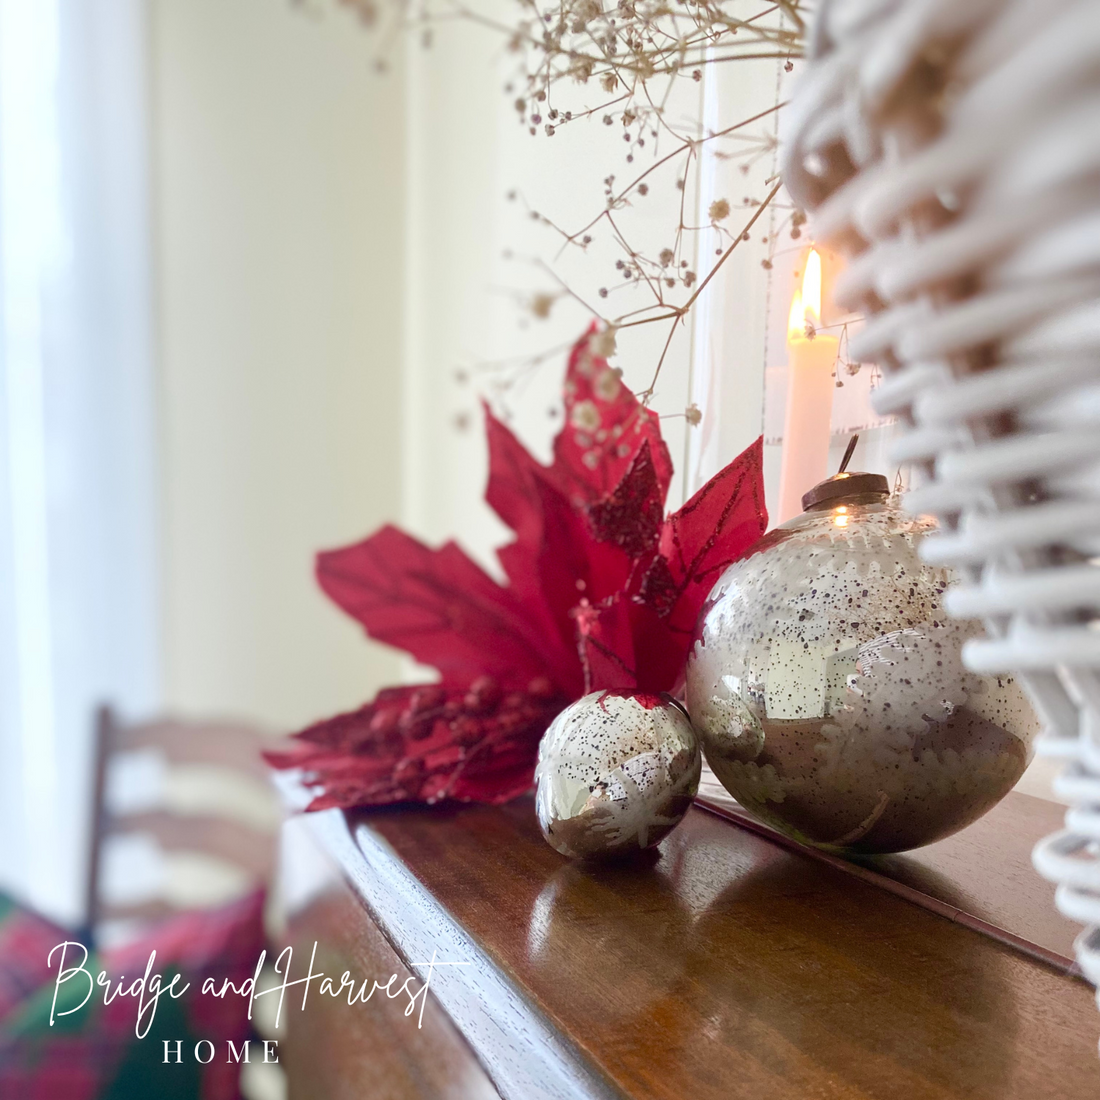 Sneak Peak To Christmas: All things Traditional And Mercury